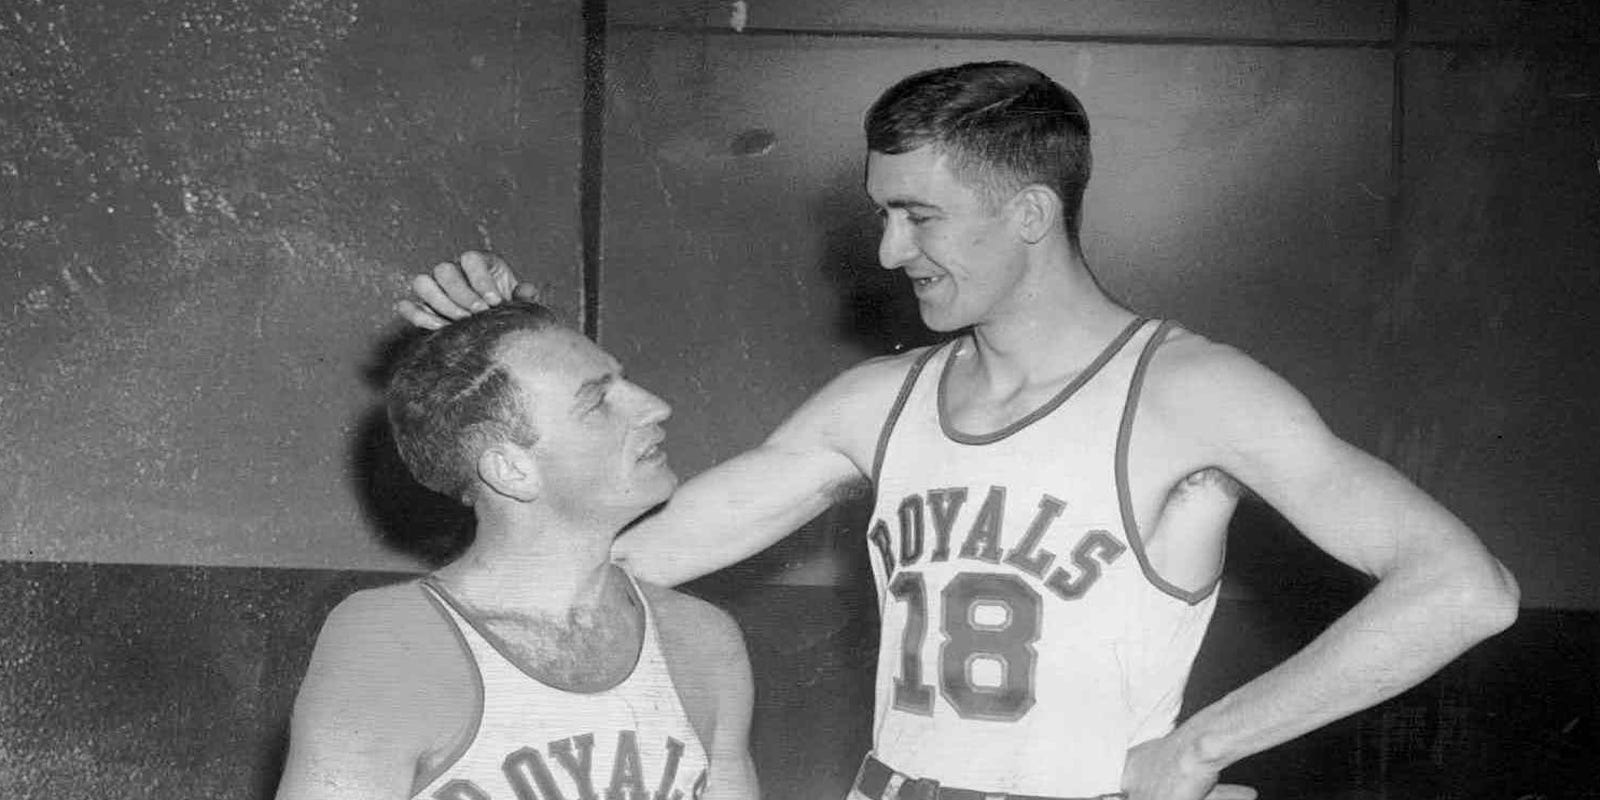 Whatever Happened To ... The Rochester Royals?